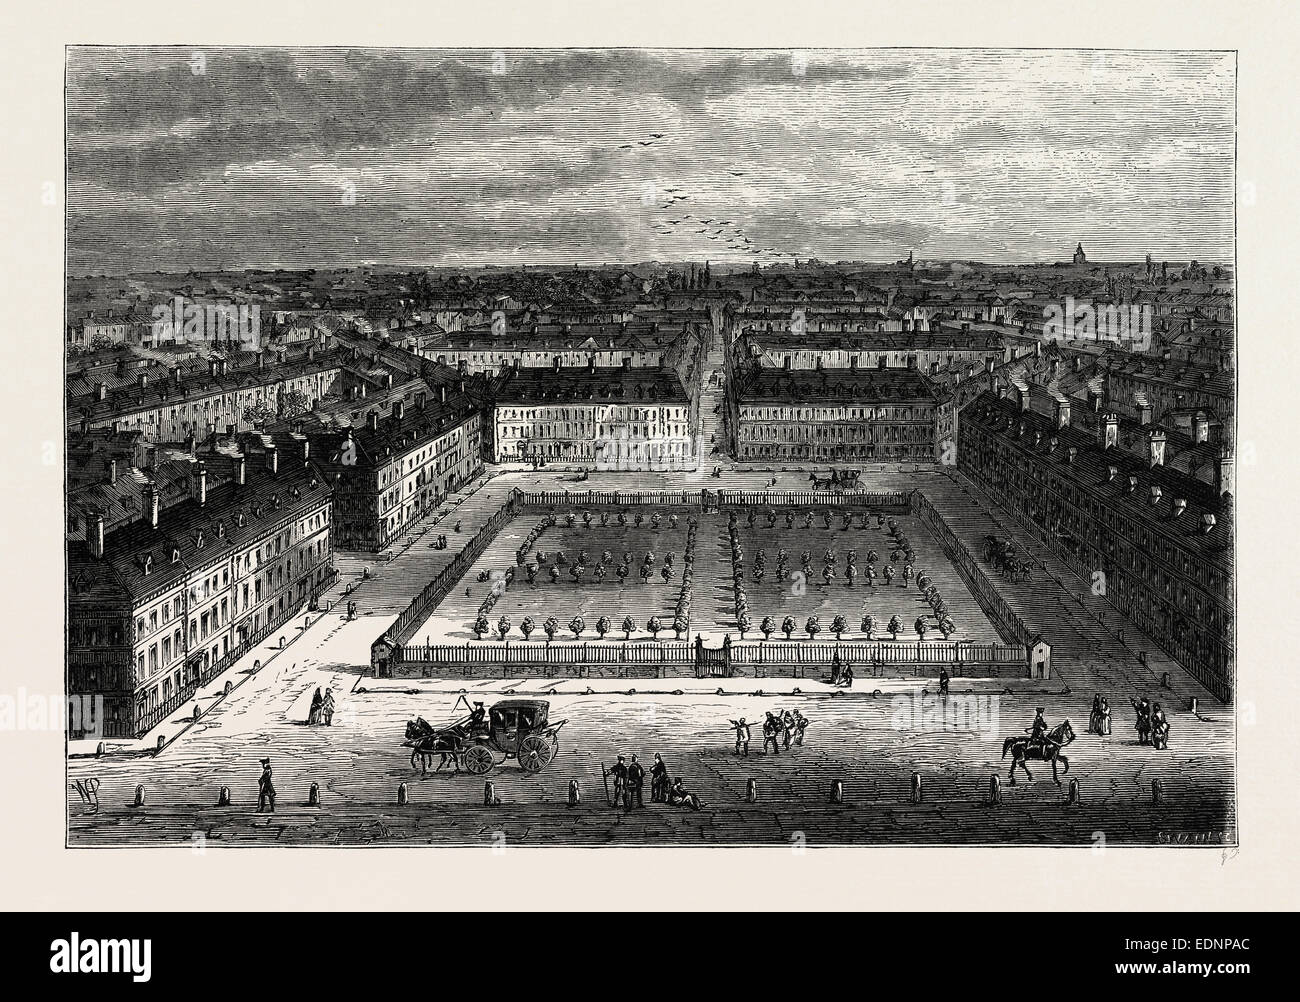 RED LION SQUARE IN 1800. London, UK, 19th century engraving Stock Photo